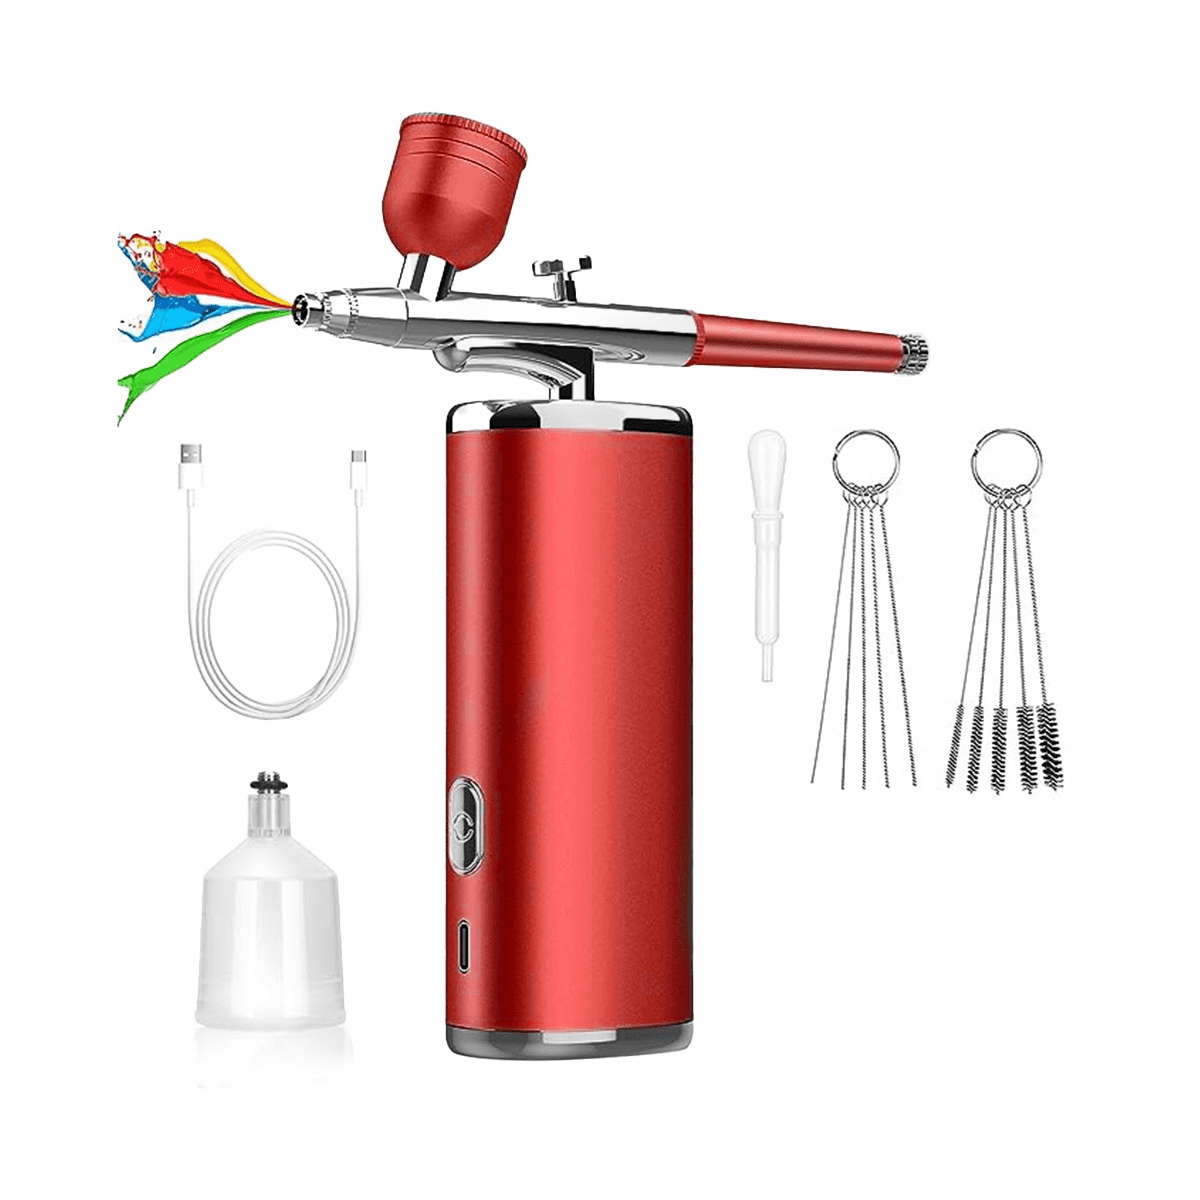 Nail Airbrush with Compressor Portable Cordless Airbrush Art Painting Air  Brush Nail Art Paint Craft Airbrush Compressor K10